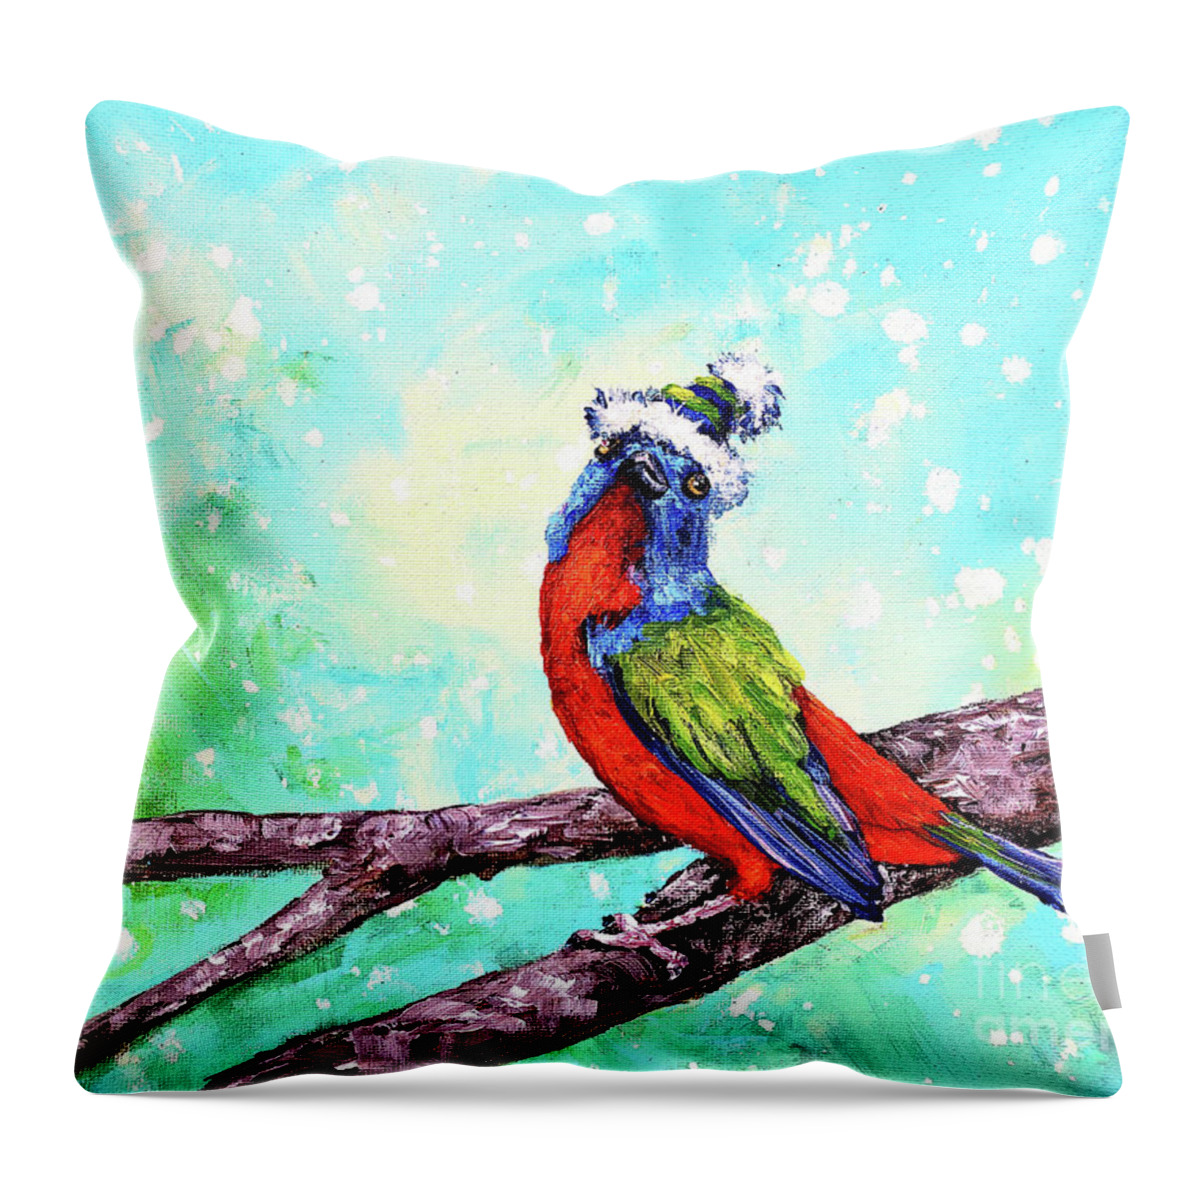  Painted Bunting Throw Pillow featuring the painting Festive Painted Bunting by Zan Savage